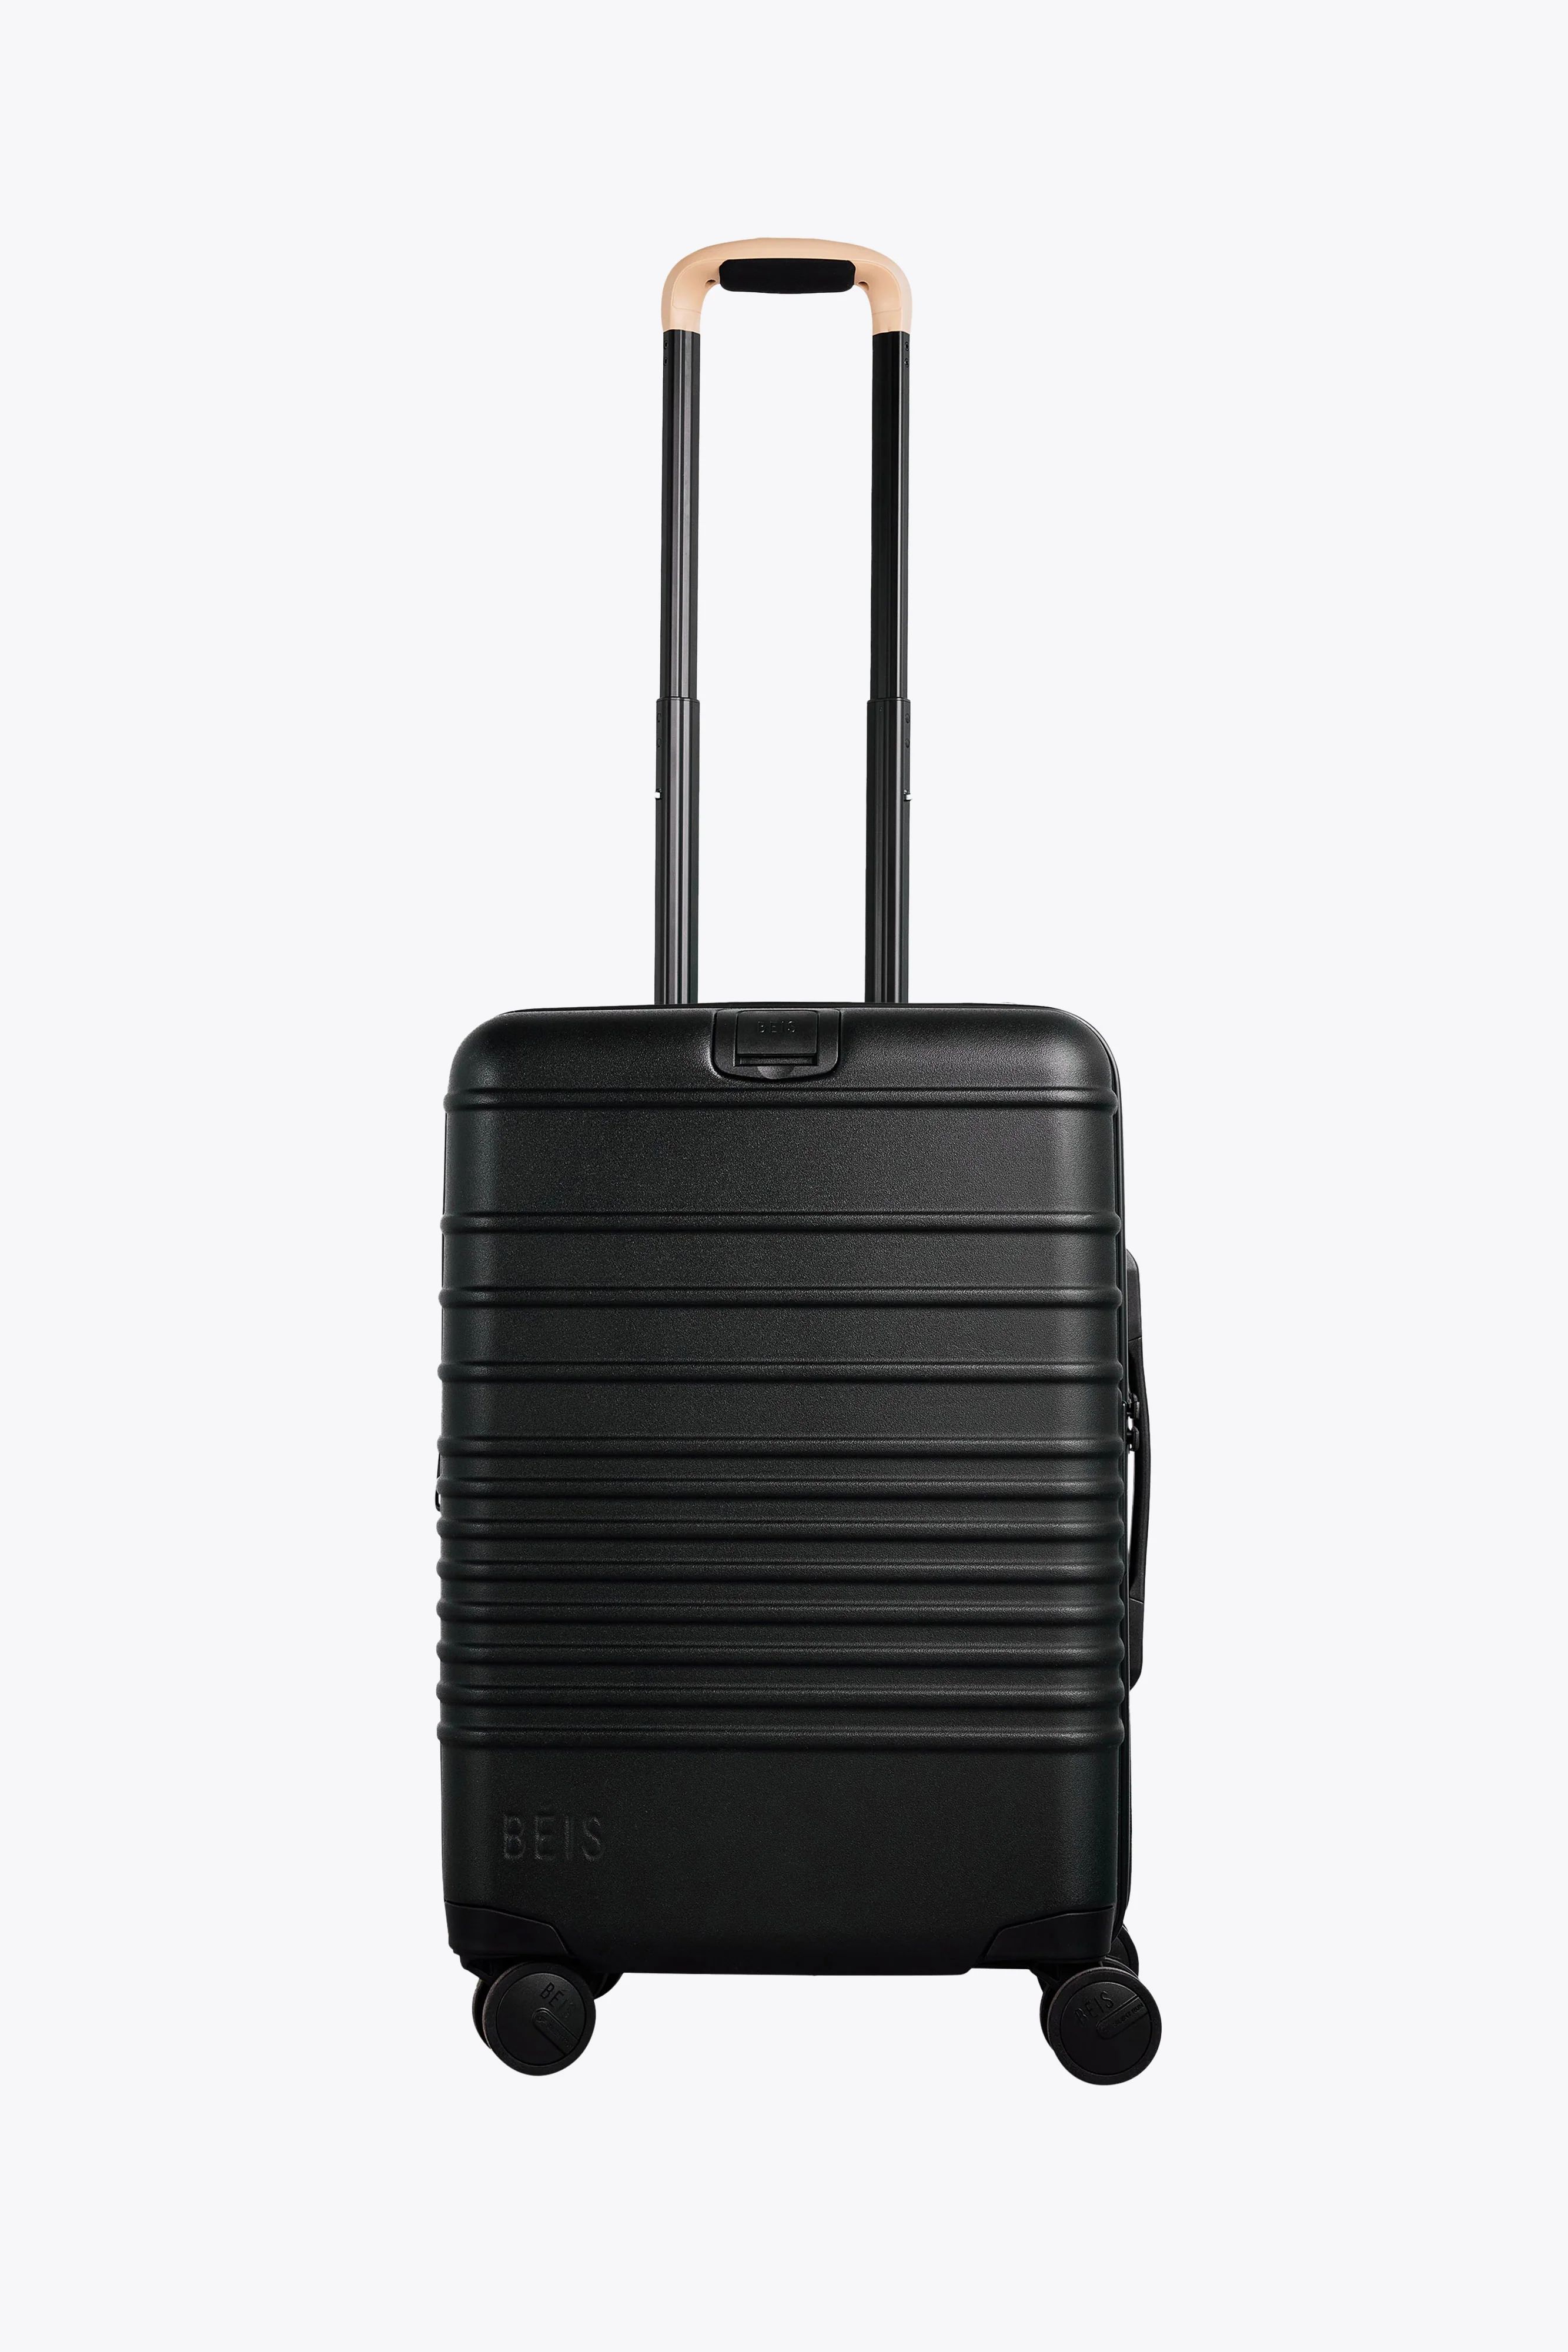 BÉIS 'The Carry-On Roller' in Black - 21" Carry On Rolling Luggage | BÉIS Travel